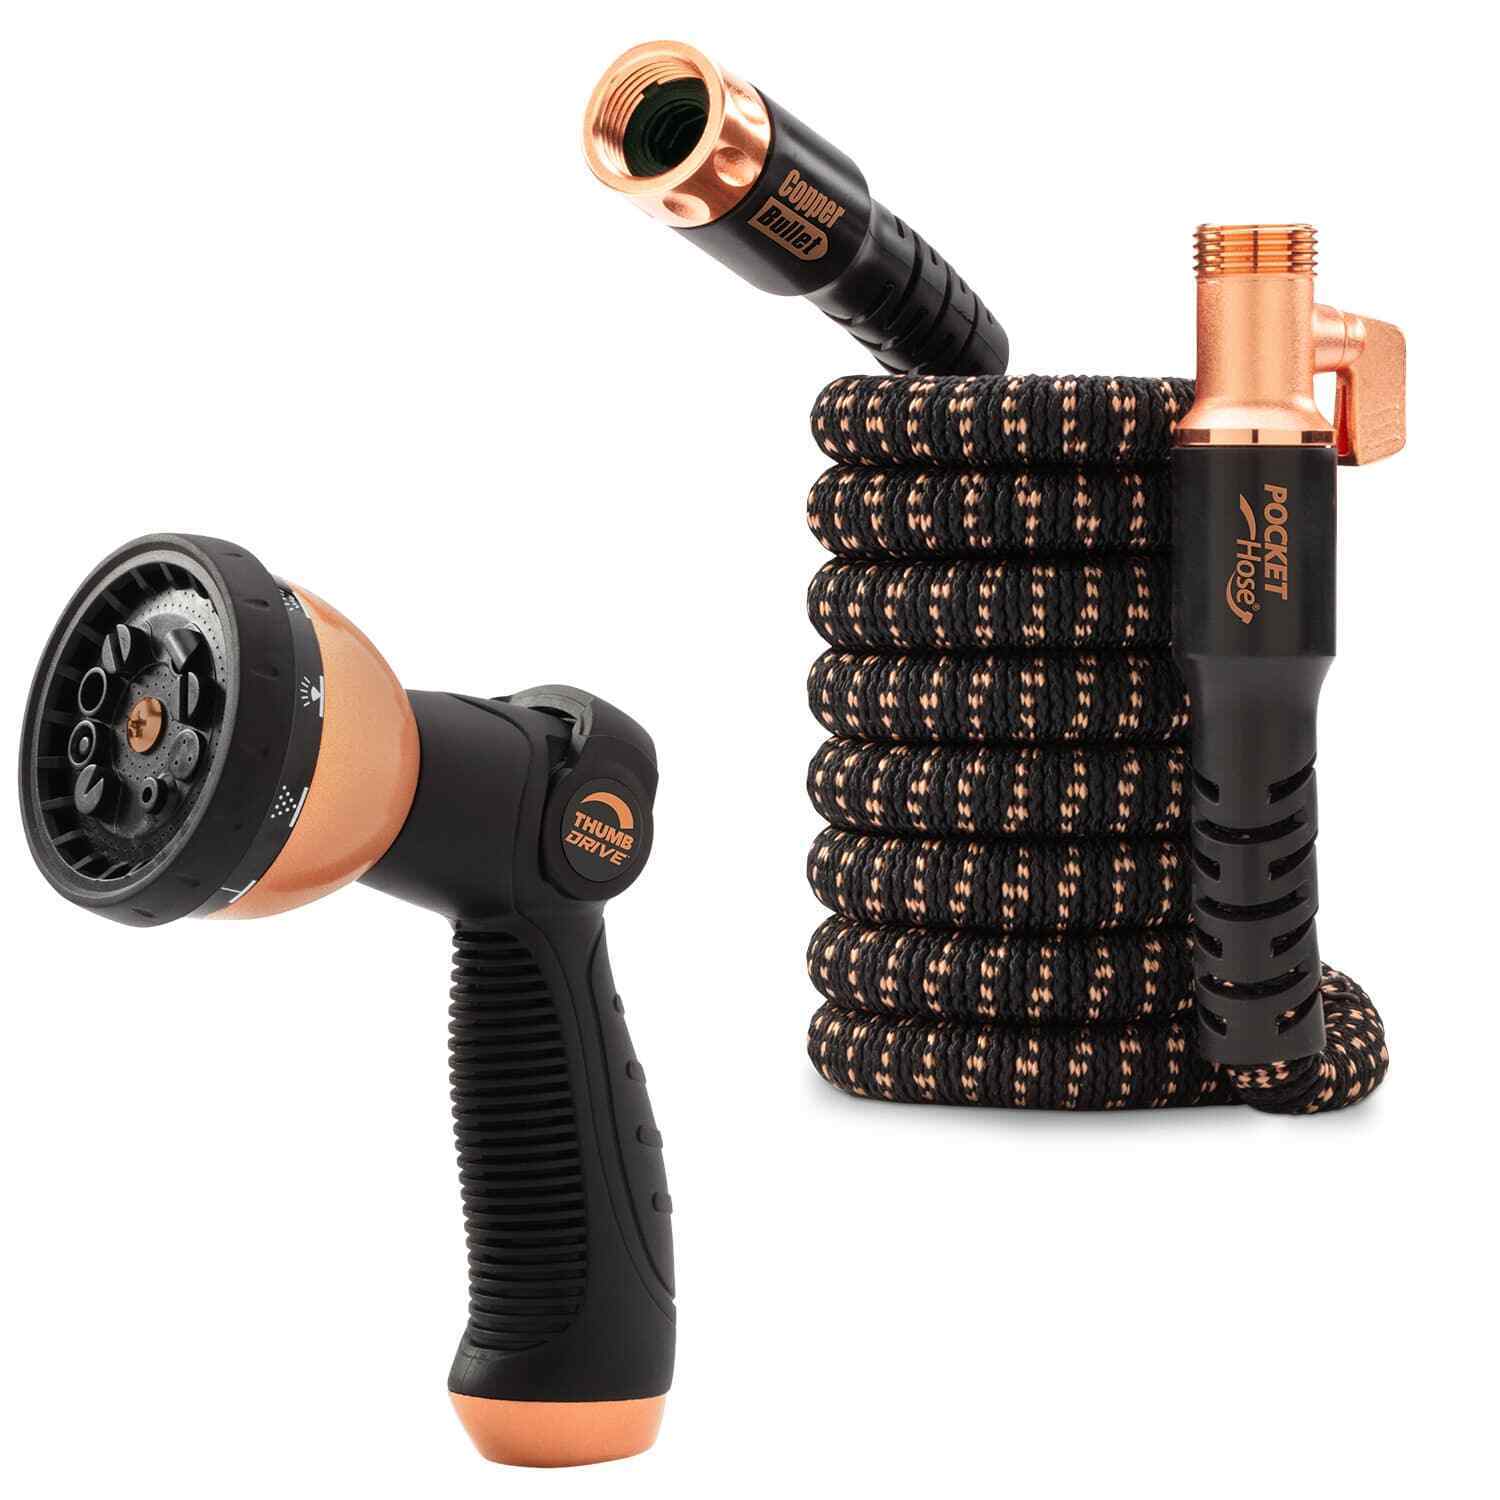 Pocket Hose Copper Bullet 25 FT With Thumb Spray Nozzle AS-SEEN-ON-TV, 650psi